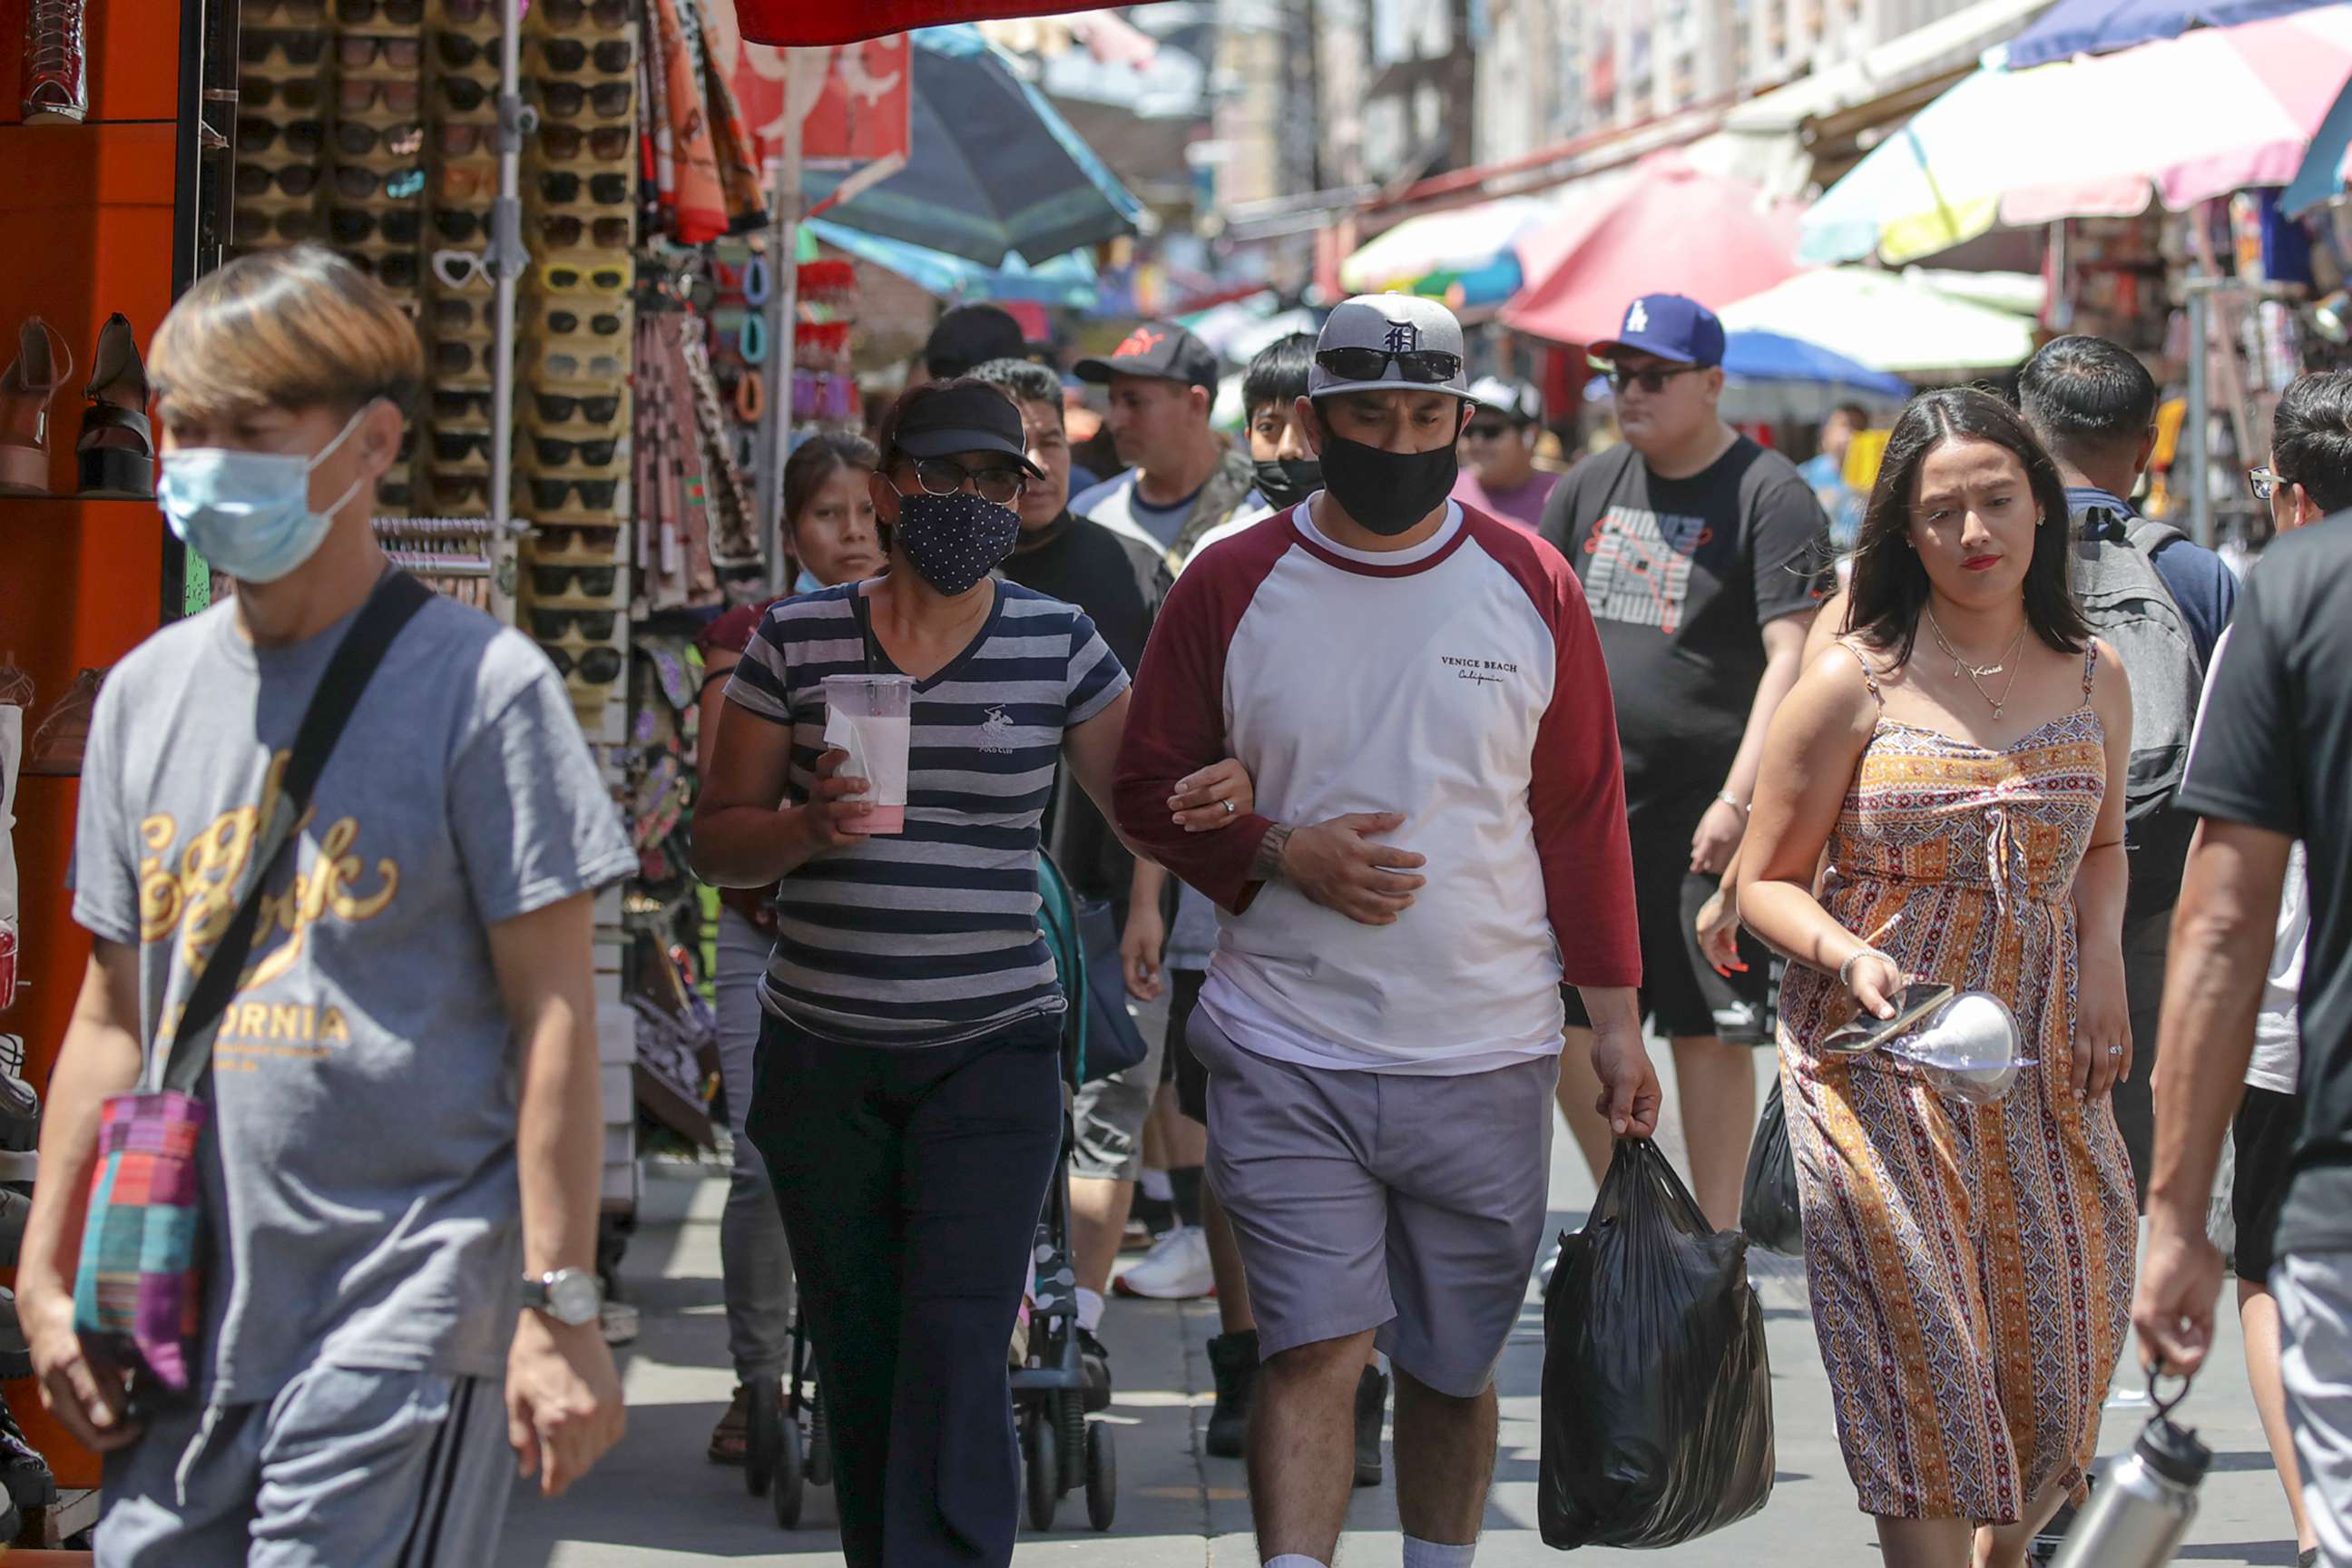 PHOTO: Shoppers, some wearing masks, visit in a market, July 14, 2022 in Los Angeles, during the COVID-19 pandemic.